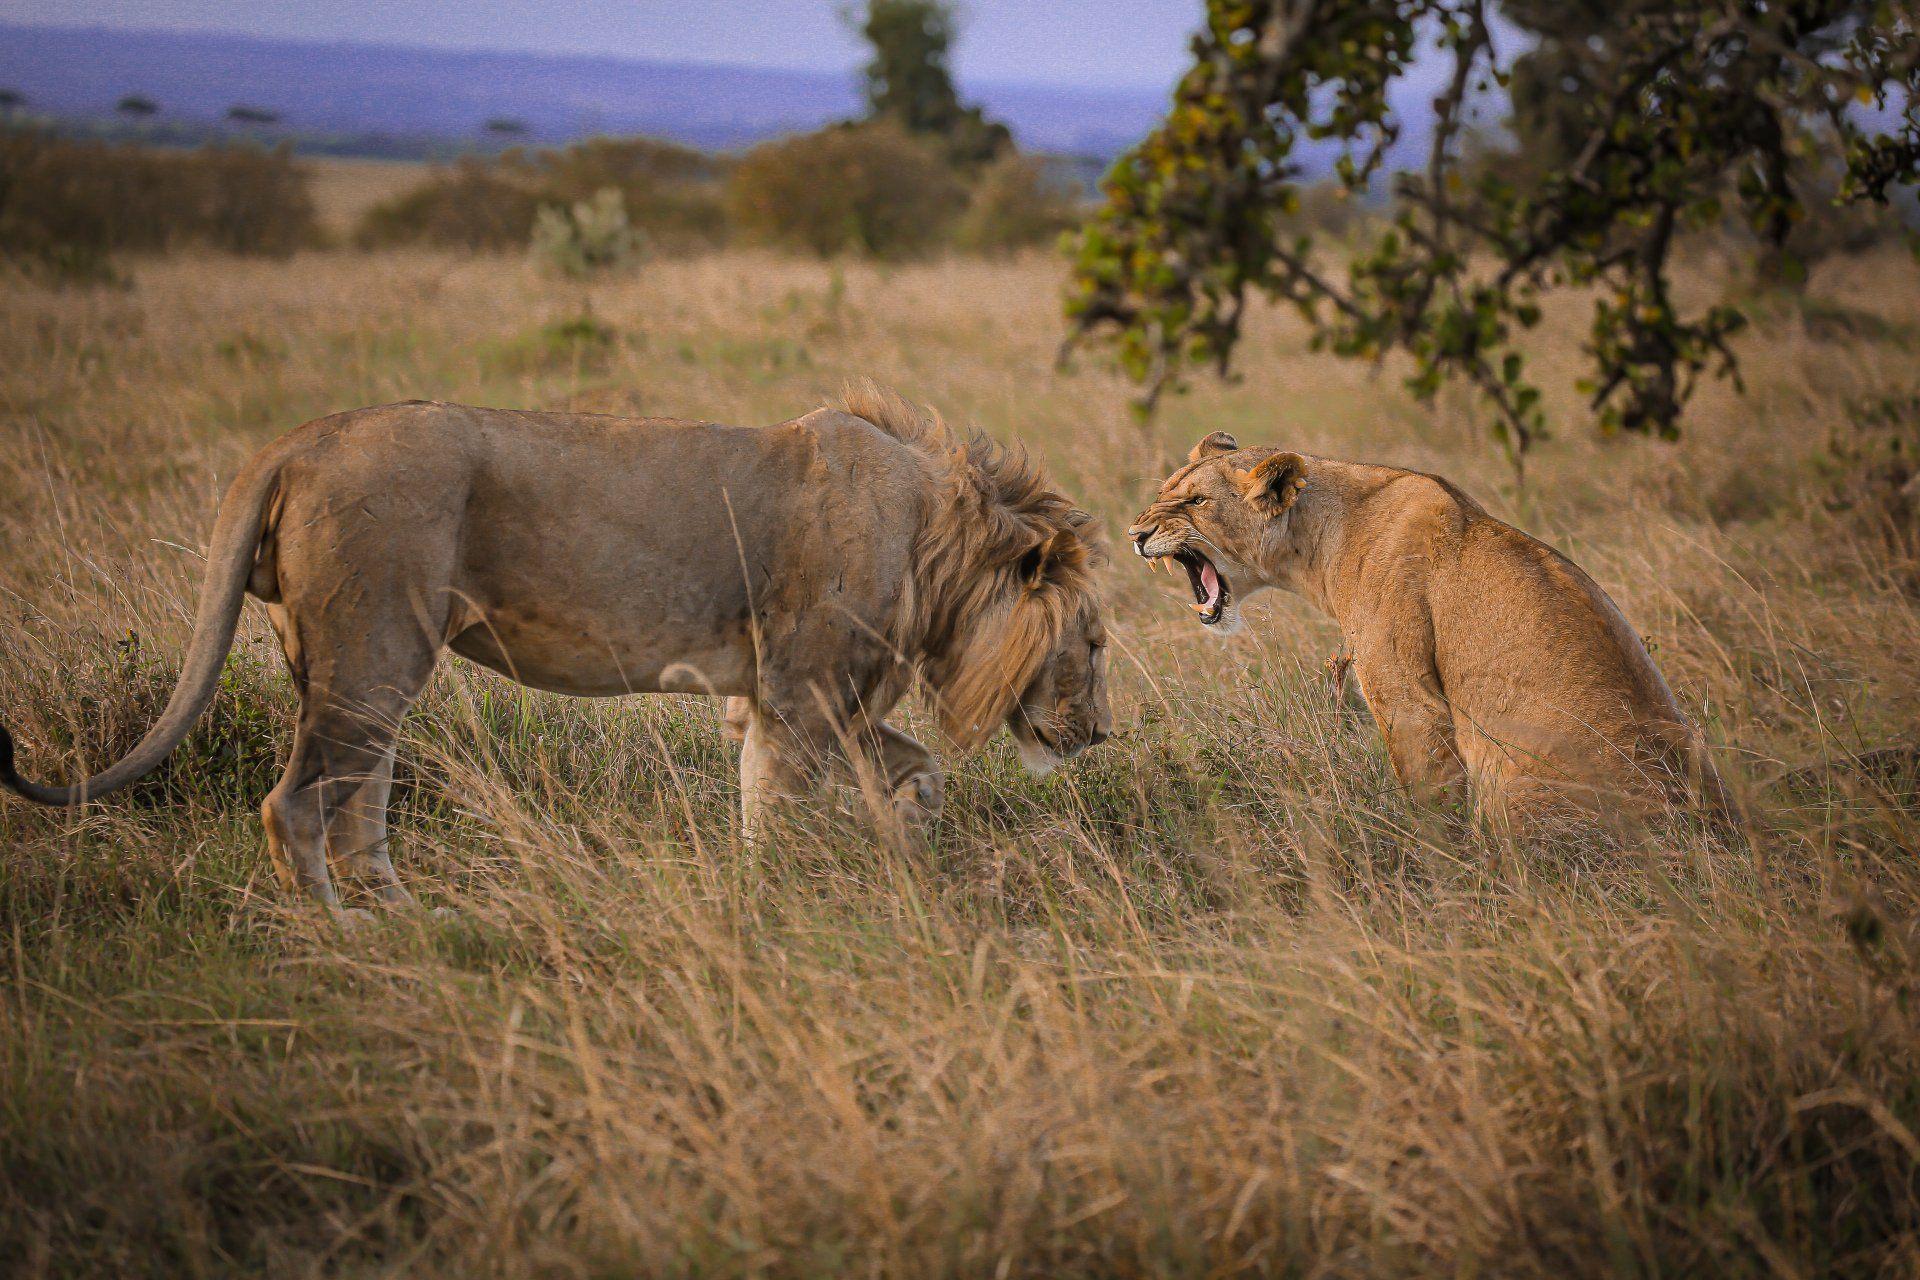 A couple of lions standing next to each other in a field.